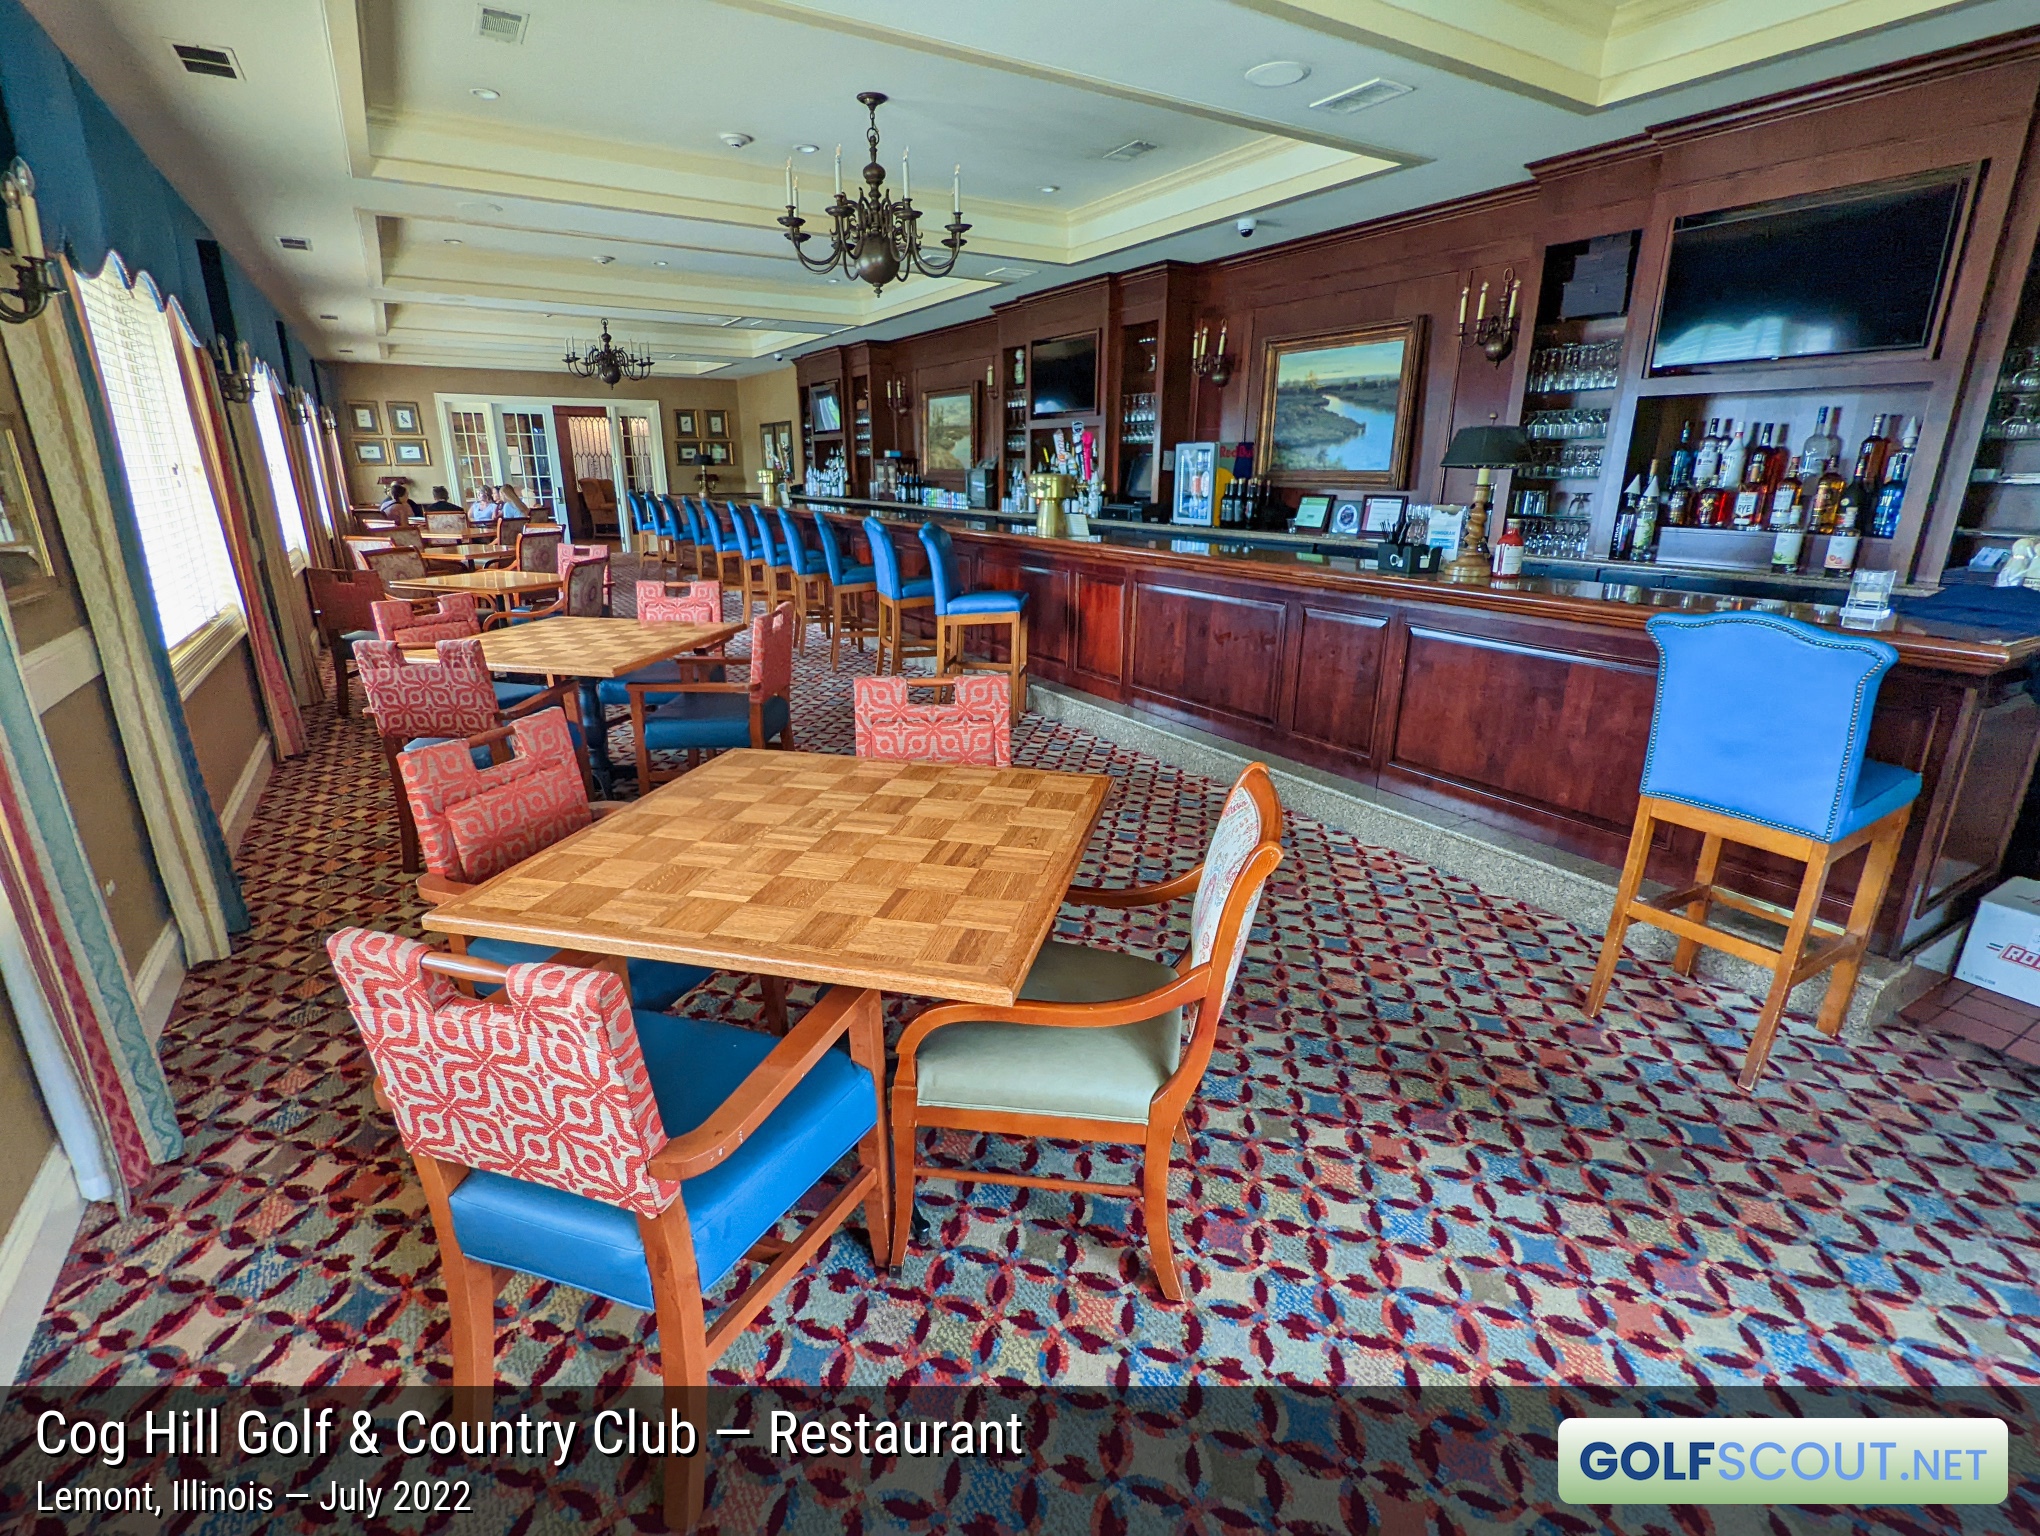 Photo of the restaurant at Cog Hill Course #1 in Lemont, Illinois. Another angle of the bar.